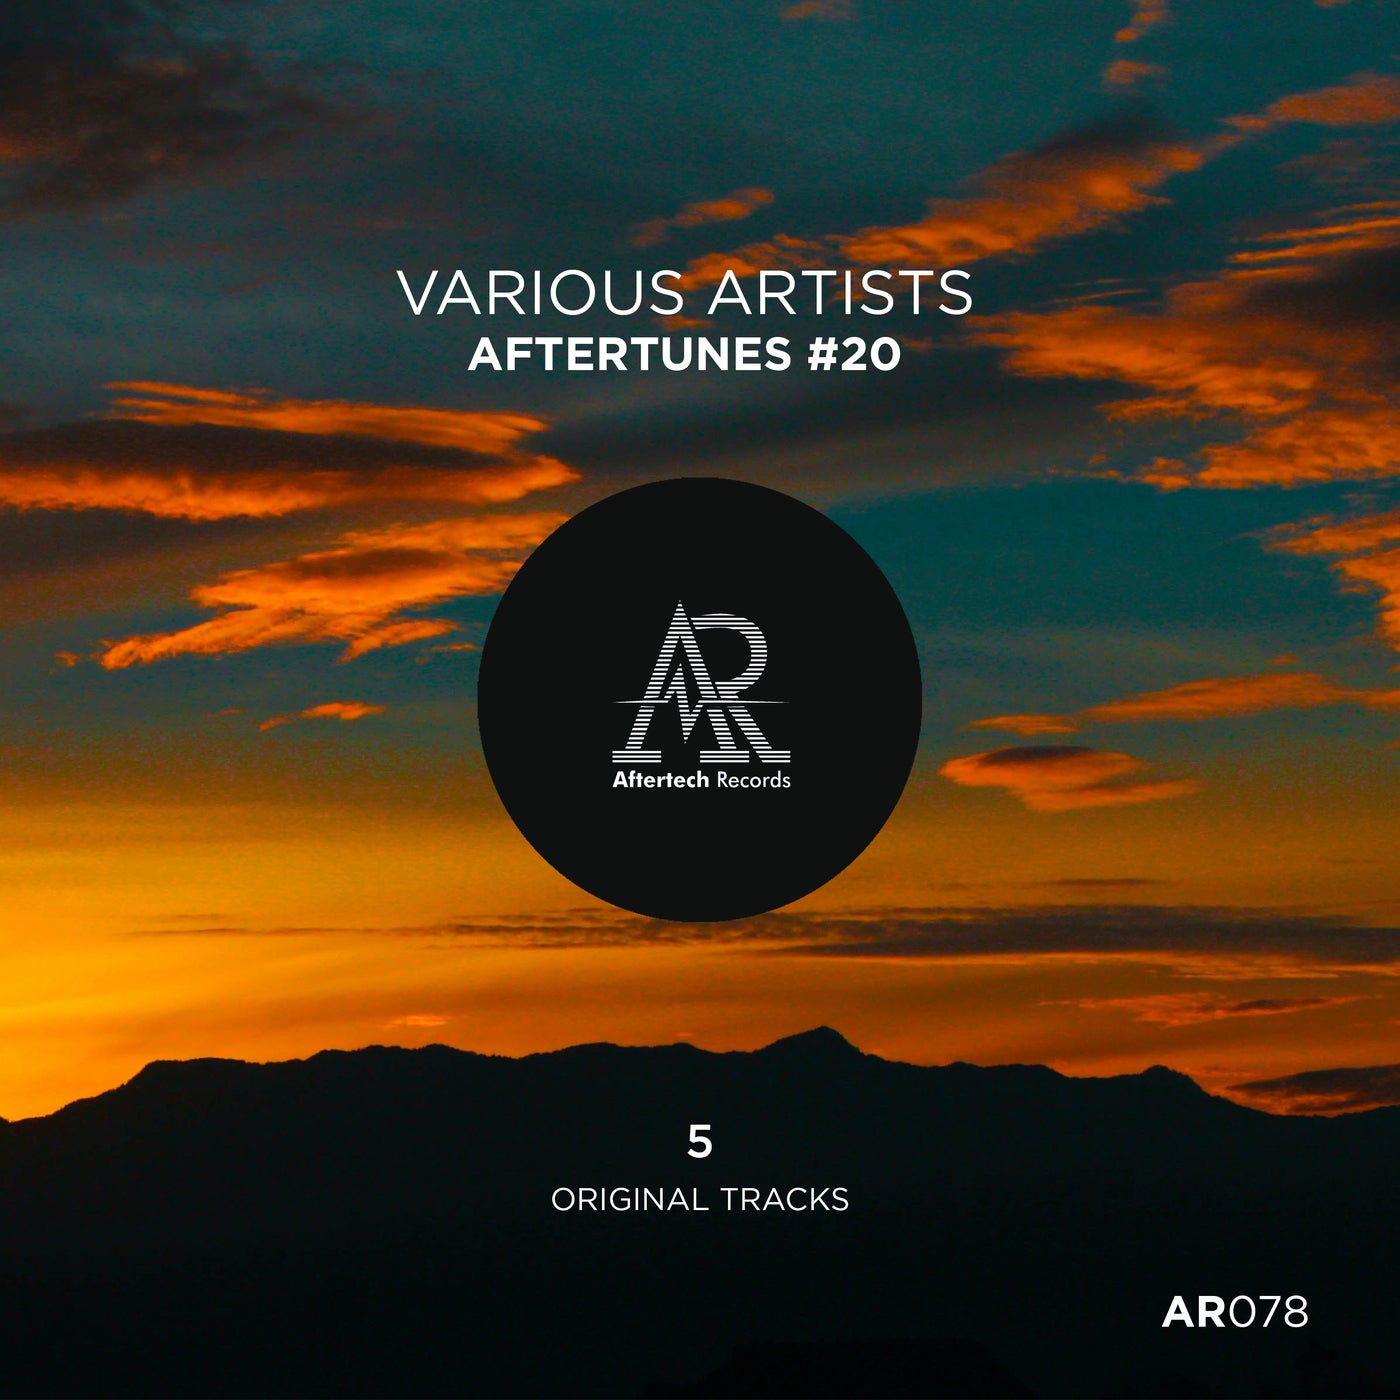 Aftertunes #20